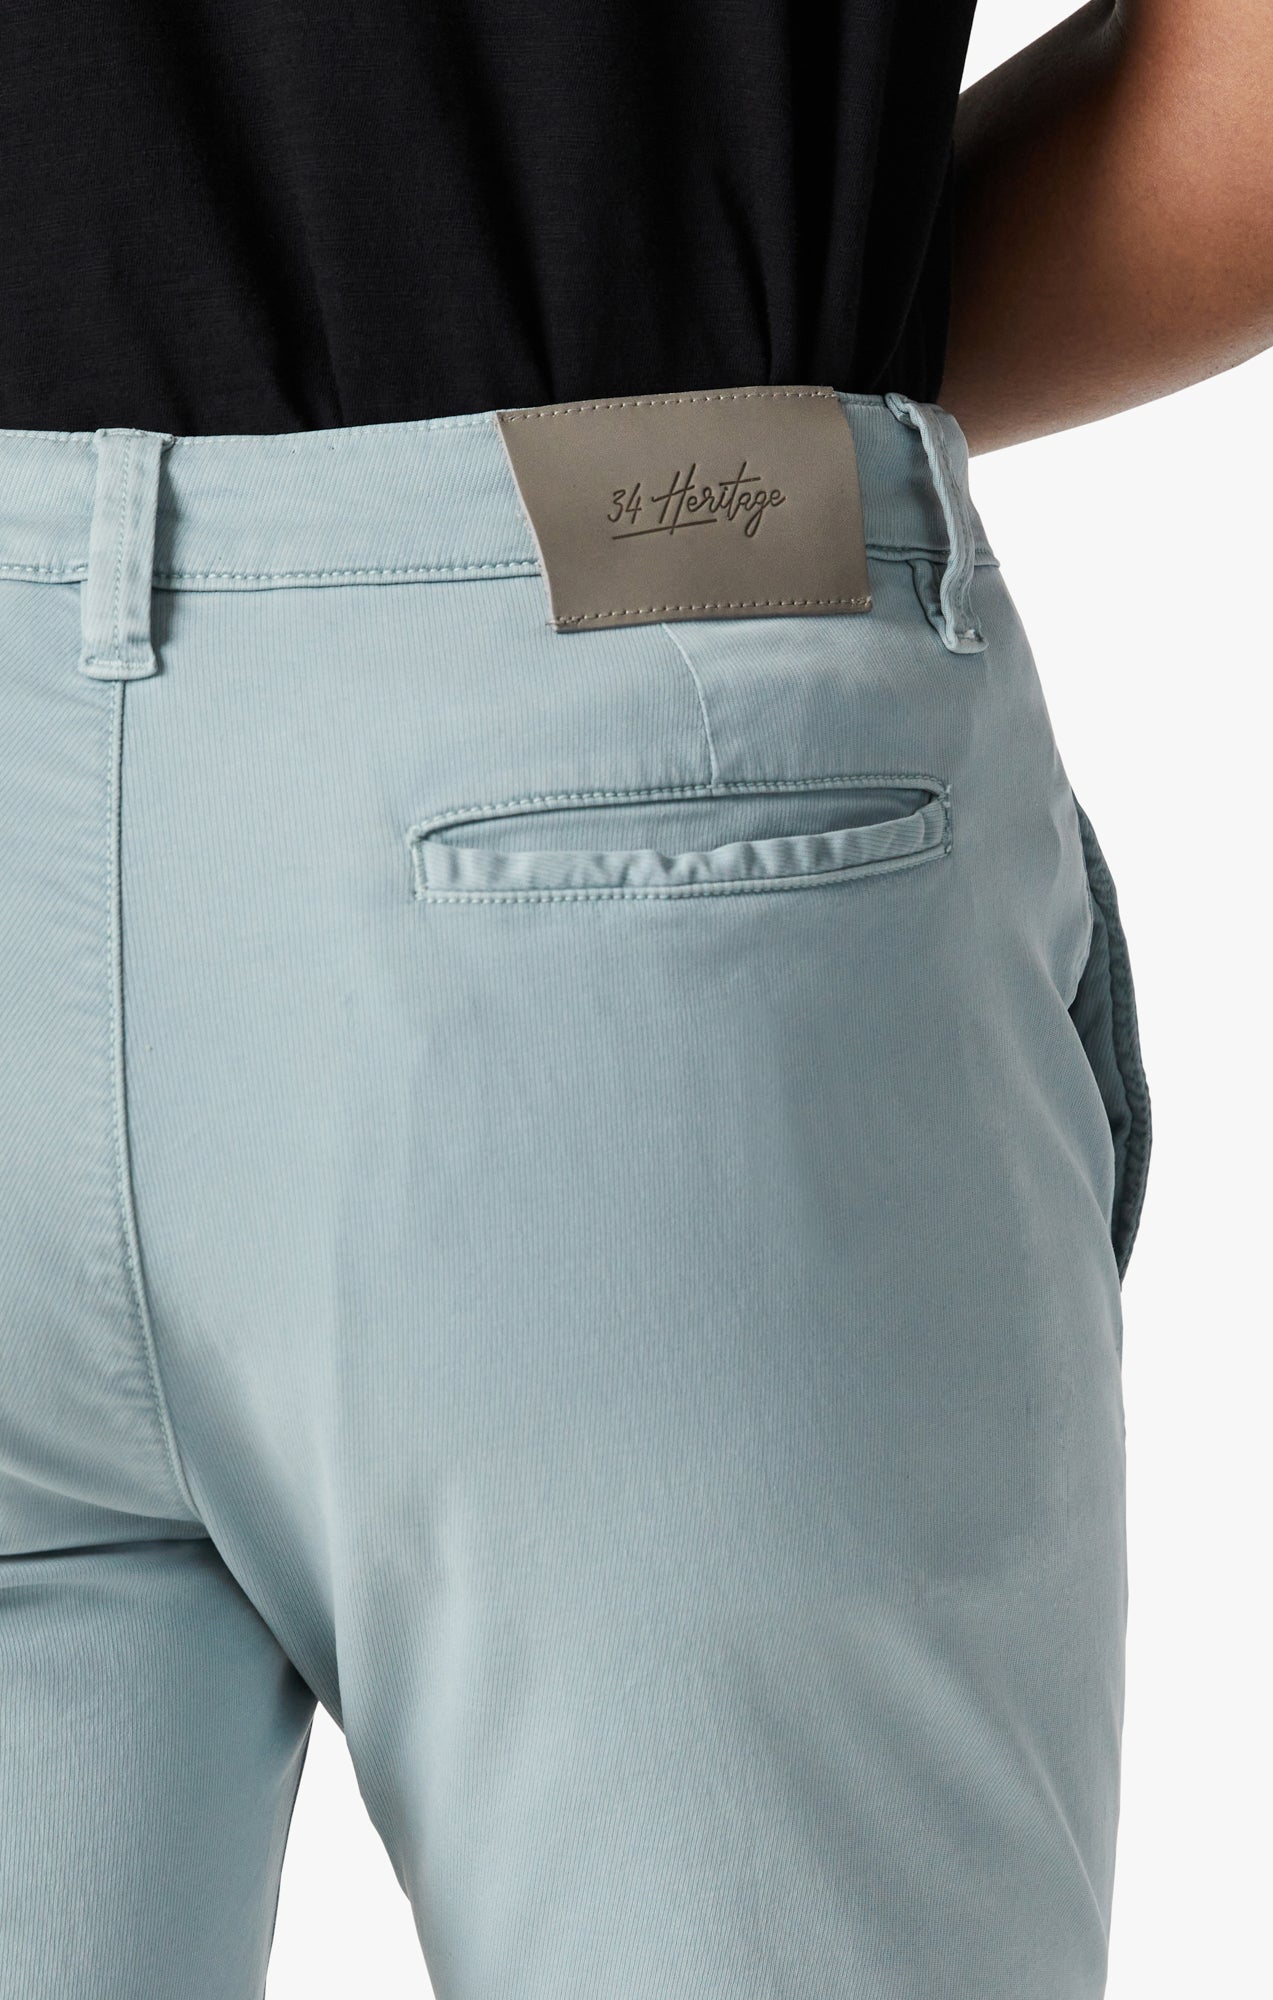 Nevada Shorts in Light Blue Soft Touch Image 6